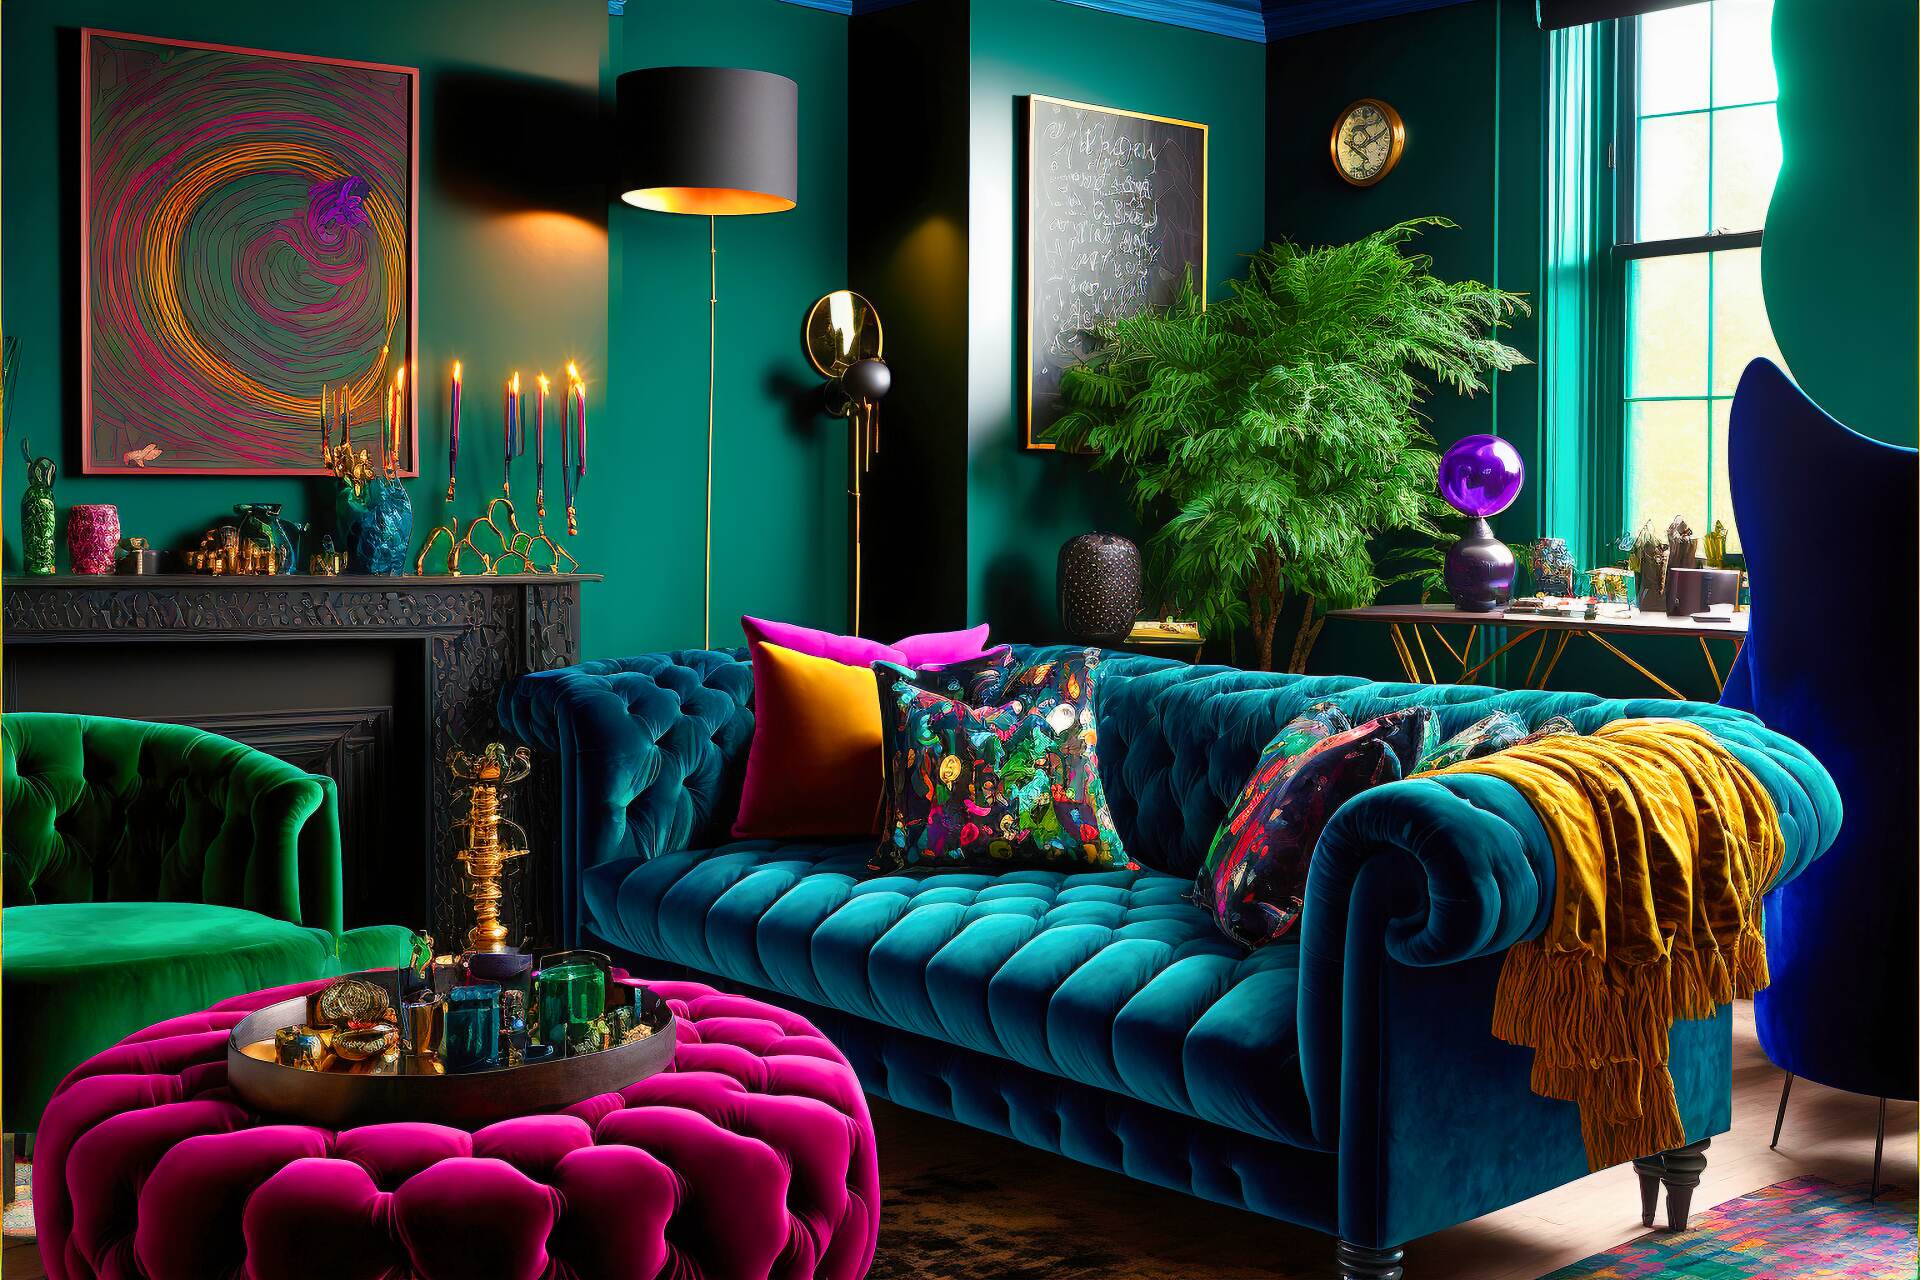 A Striking Maximalist Living Room With Flair - This Living Room Is A Vibrant Mix Of Bold Colors And Opulent Furnishings For A Modern Maximalist Dream Come True! Against The Deep Green Walls, An Eye-Catching Rainbow Palette Of Furniture And Accents Come Alive. On The Left Hand Side Rests An Impressive Forest Green Chesterfield Sofa With Bright Purple And Turquoise Pillows Atop. This Flashes Beautifully Against The Cream Velvet Armchair Centered Beneath A Luxurious Navy Blue And Gold Velvet Drapery. Further Brightening The Scene Are A Pair Of Mirrored And Chrome Side Tables, Dazzling Artwork And A Grand, Pearl-White Television Screen.